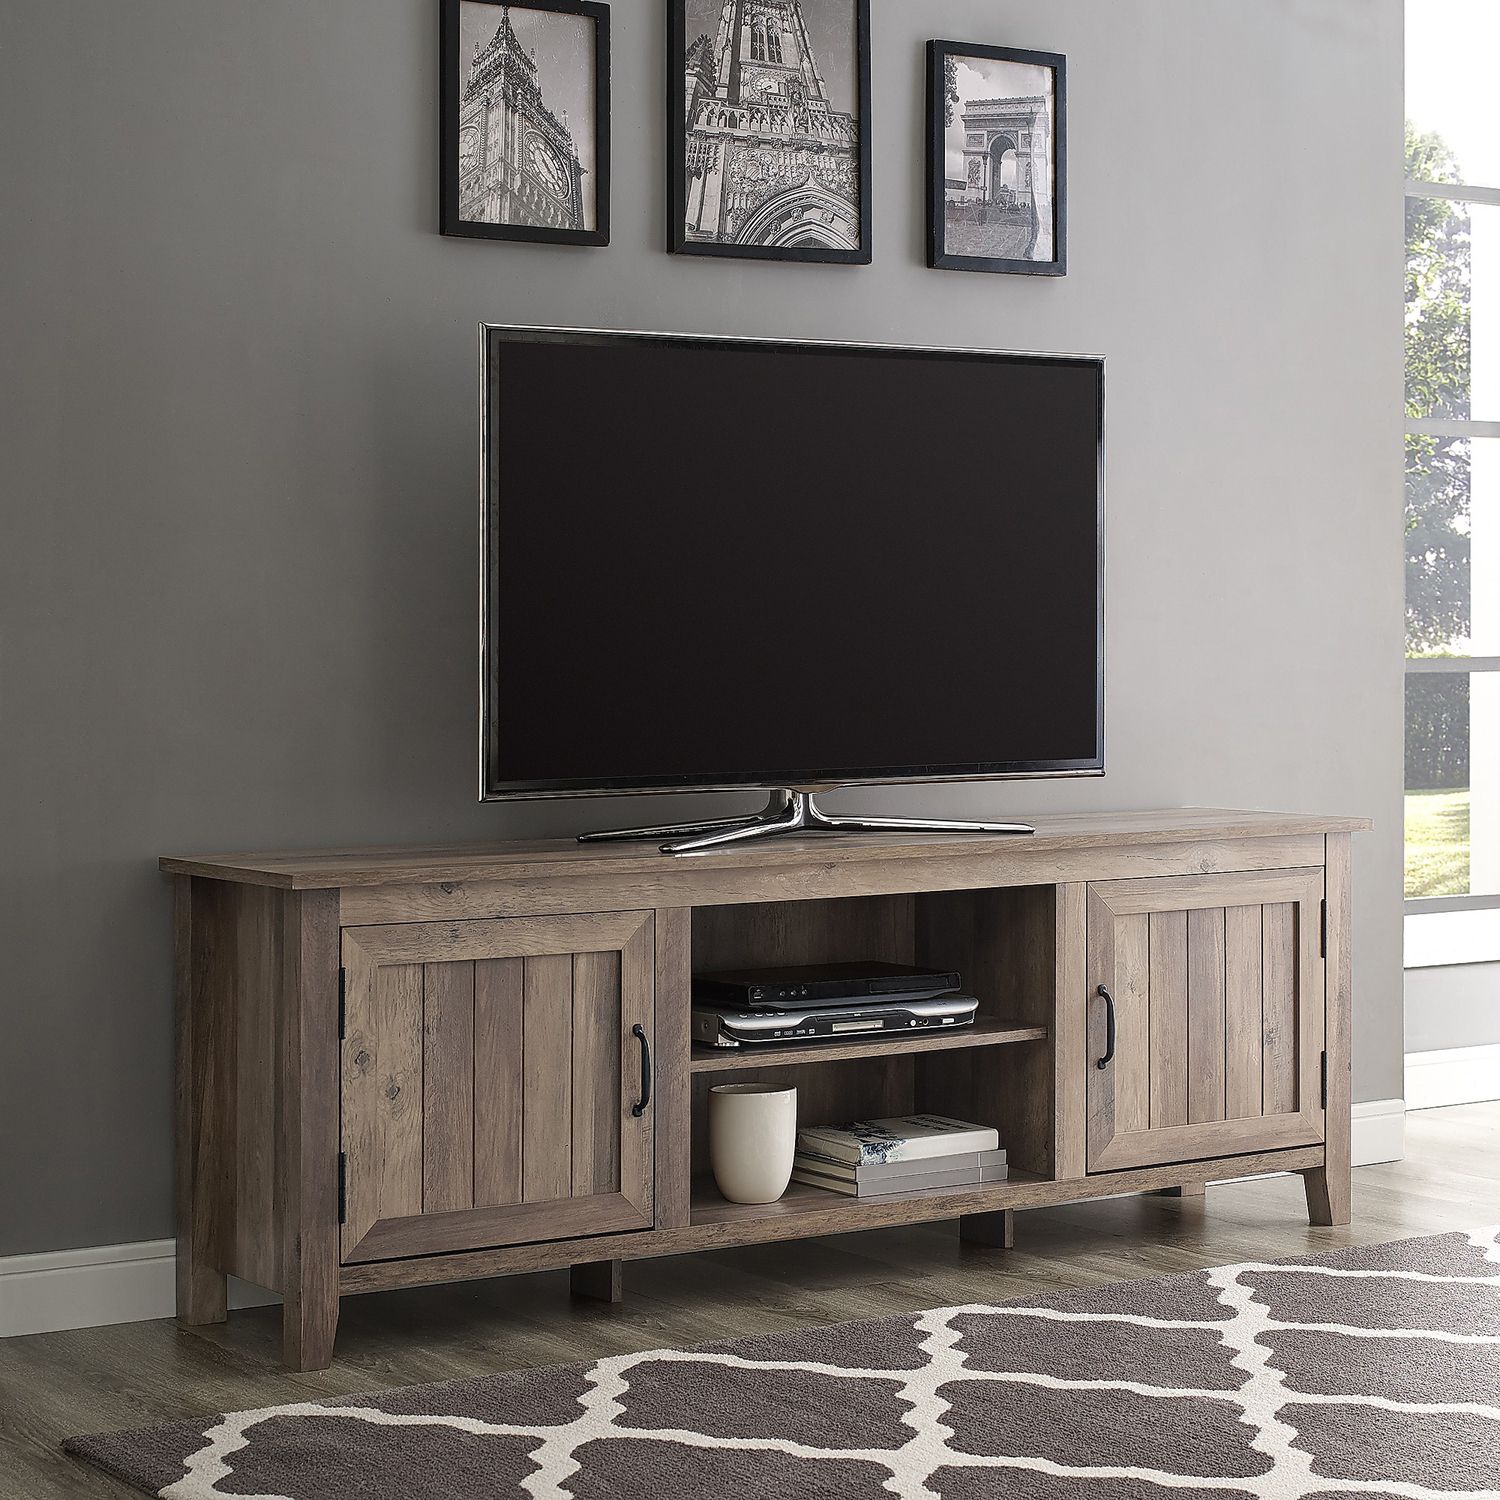 2019 Farmhouse Tv Stands For 70 Inch Tv Within Modern Farmhouse 70" Tv Stand With Beadboard Doors – Pier (View 15 of 15)